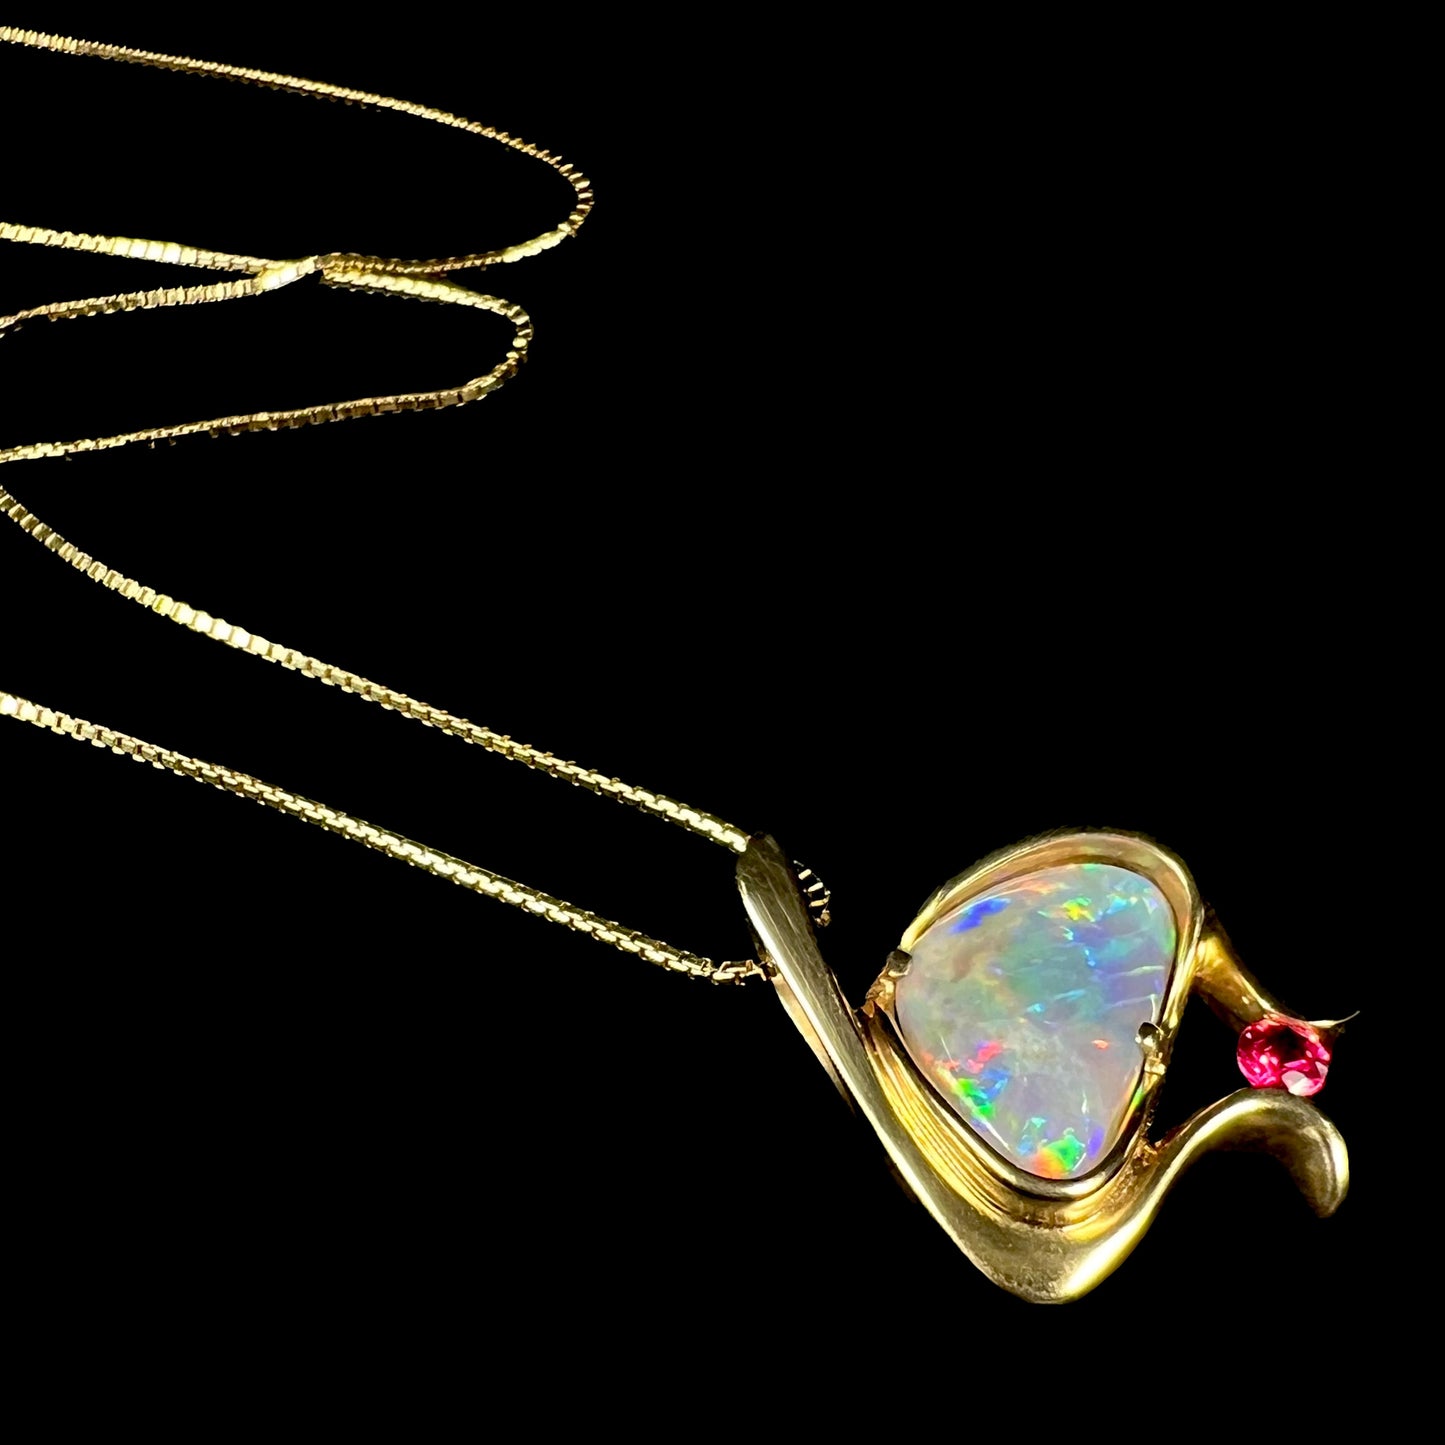 A ladies' yellow gold pendant bezel set with a natural black opal and pink sapphire accent.  The opal shines red, green, blue, and purple.